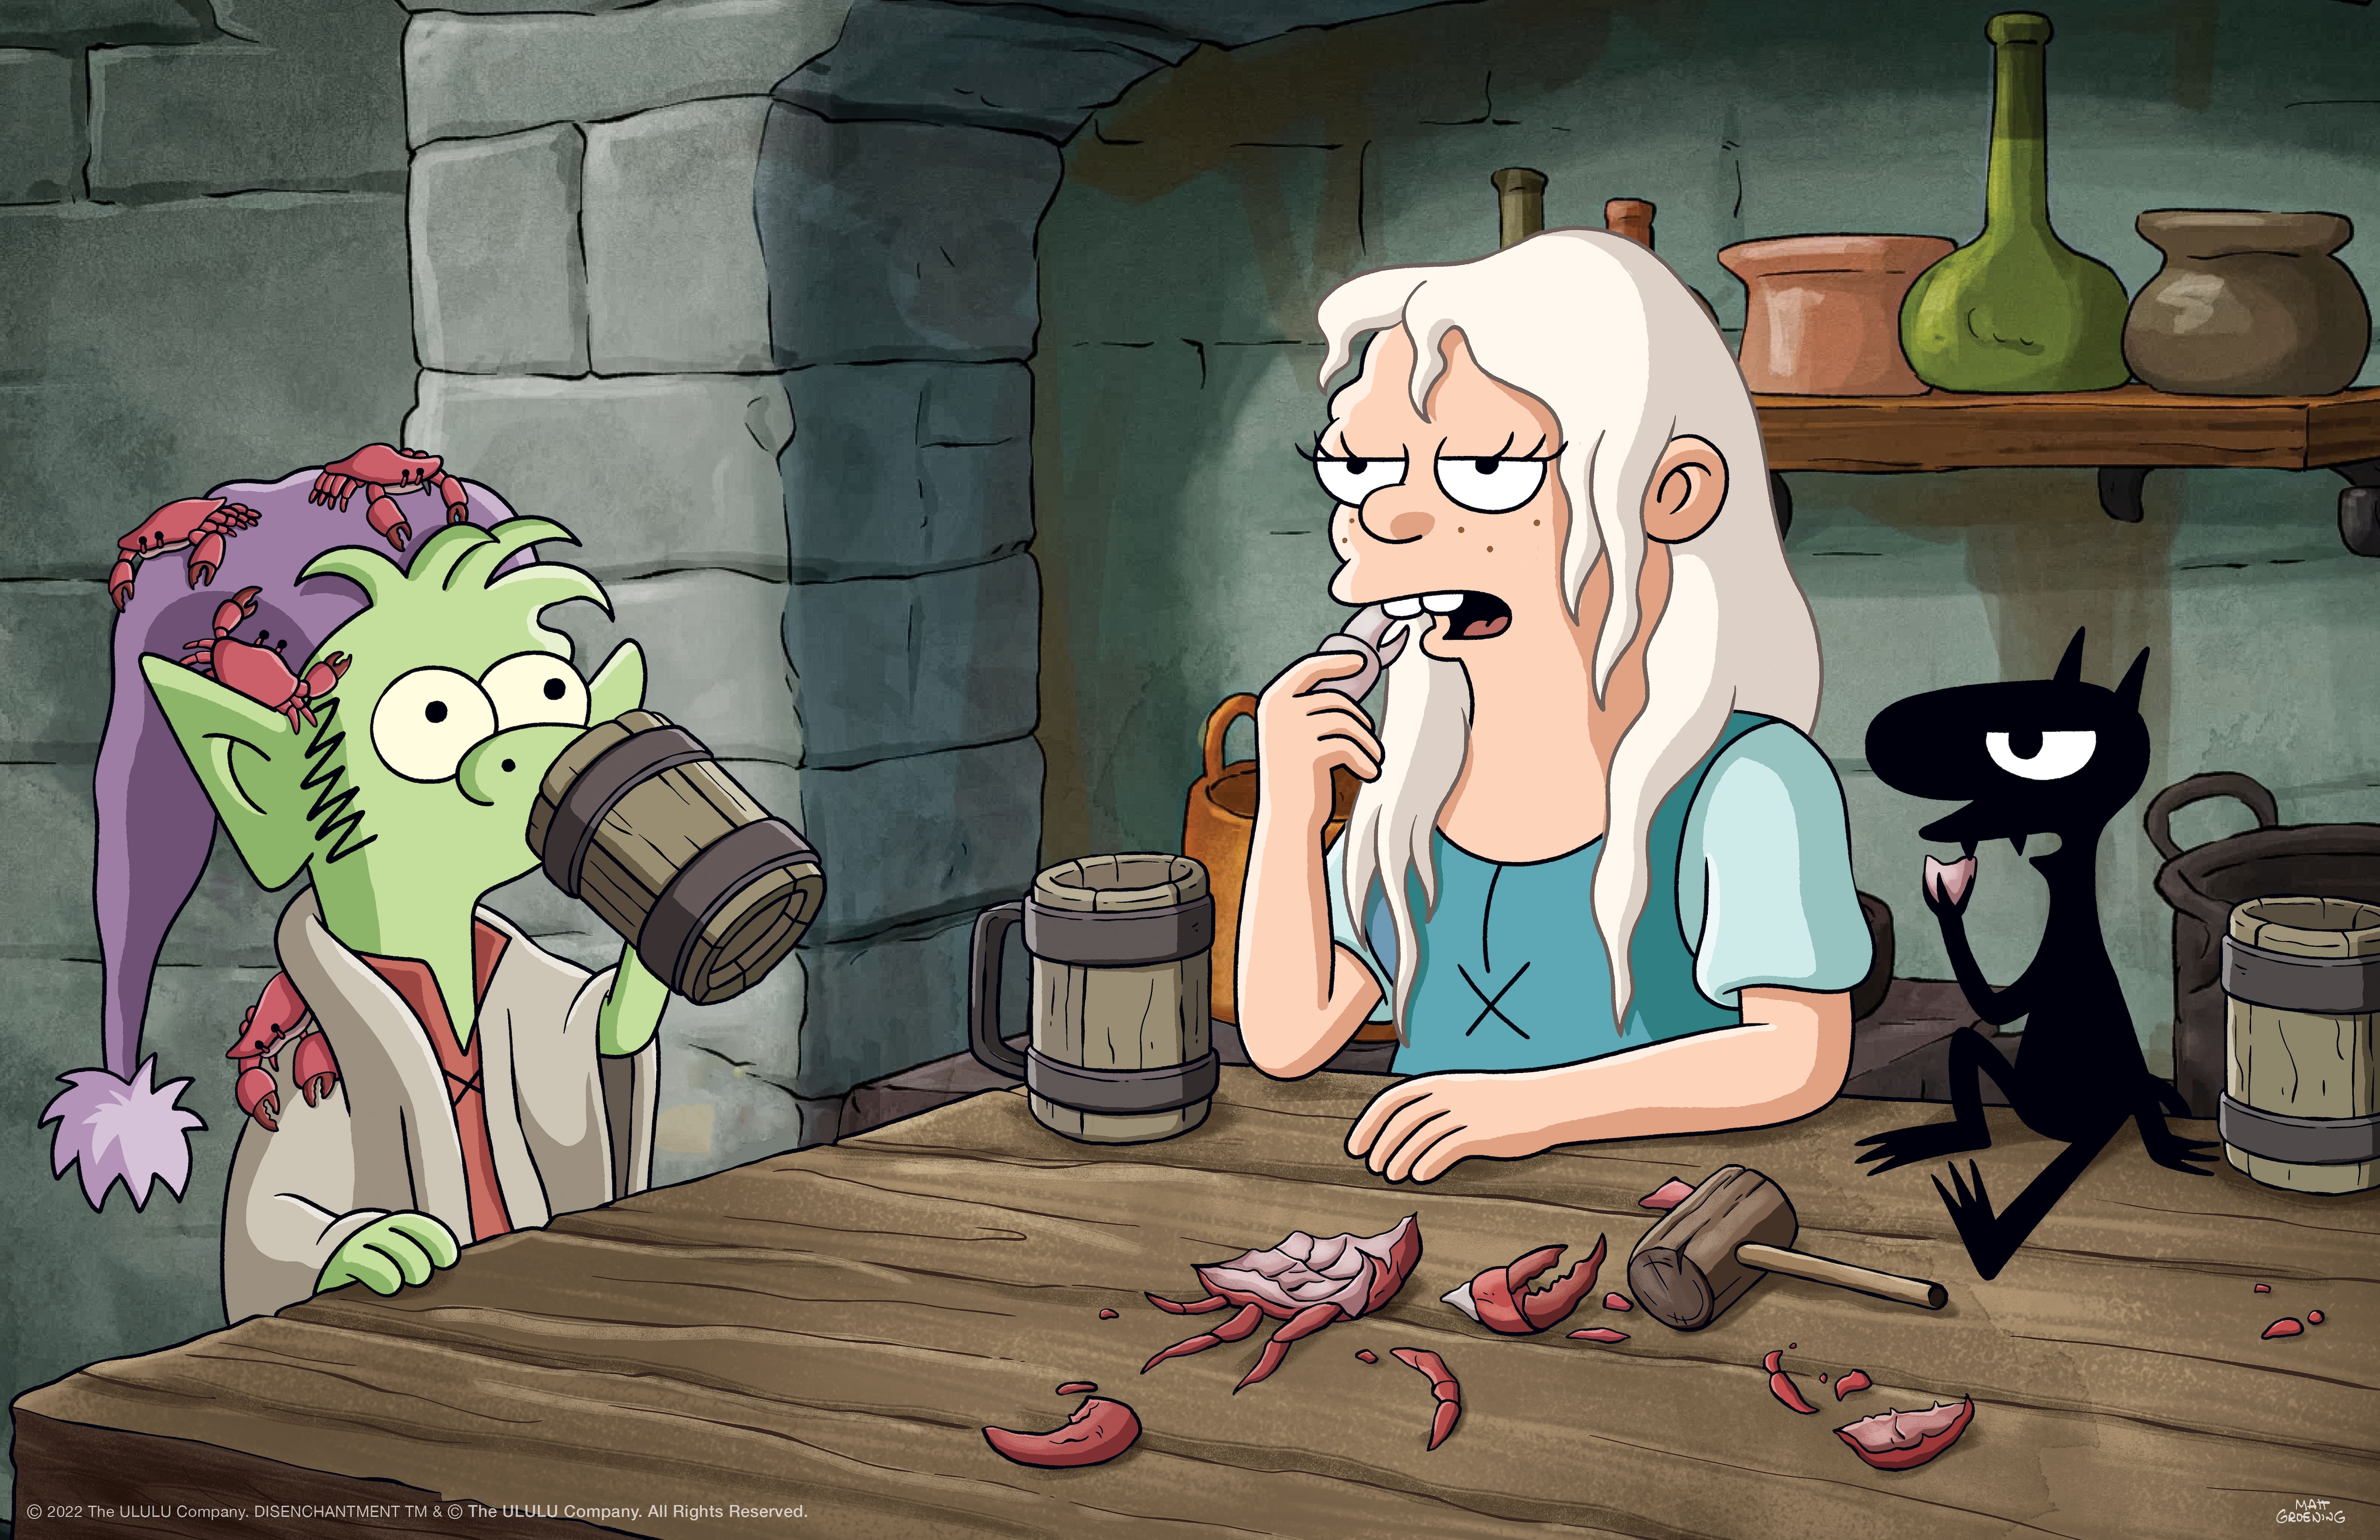 Netflix's Disenchantment to End With Part 5 - IGN